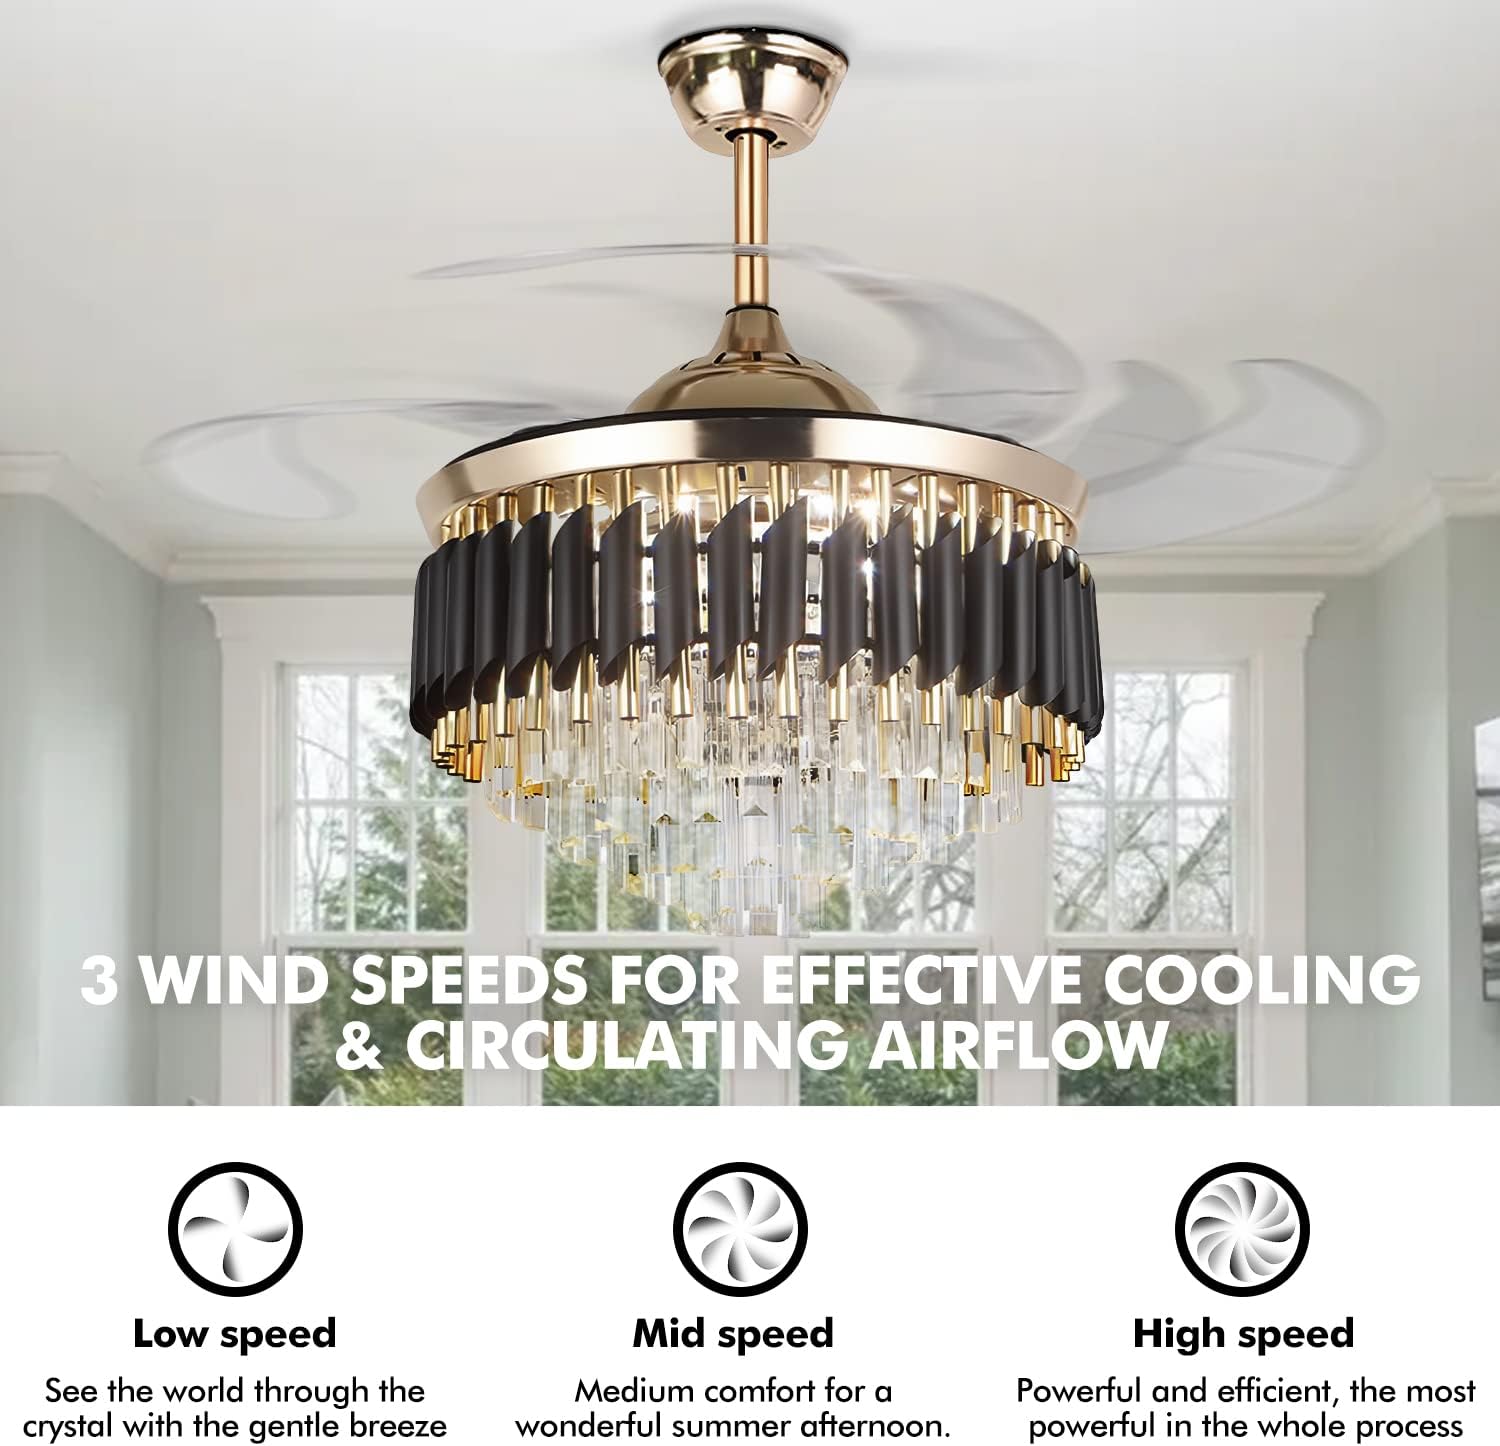 QHRAY 42” Modern Luxury Fandelier Crystal Chandelier Lamp Ceiling Fan Light with Invisible Retractable Blades for Living Room Dining Room Kitchen,French Gold